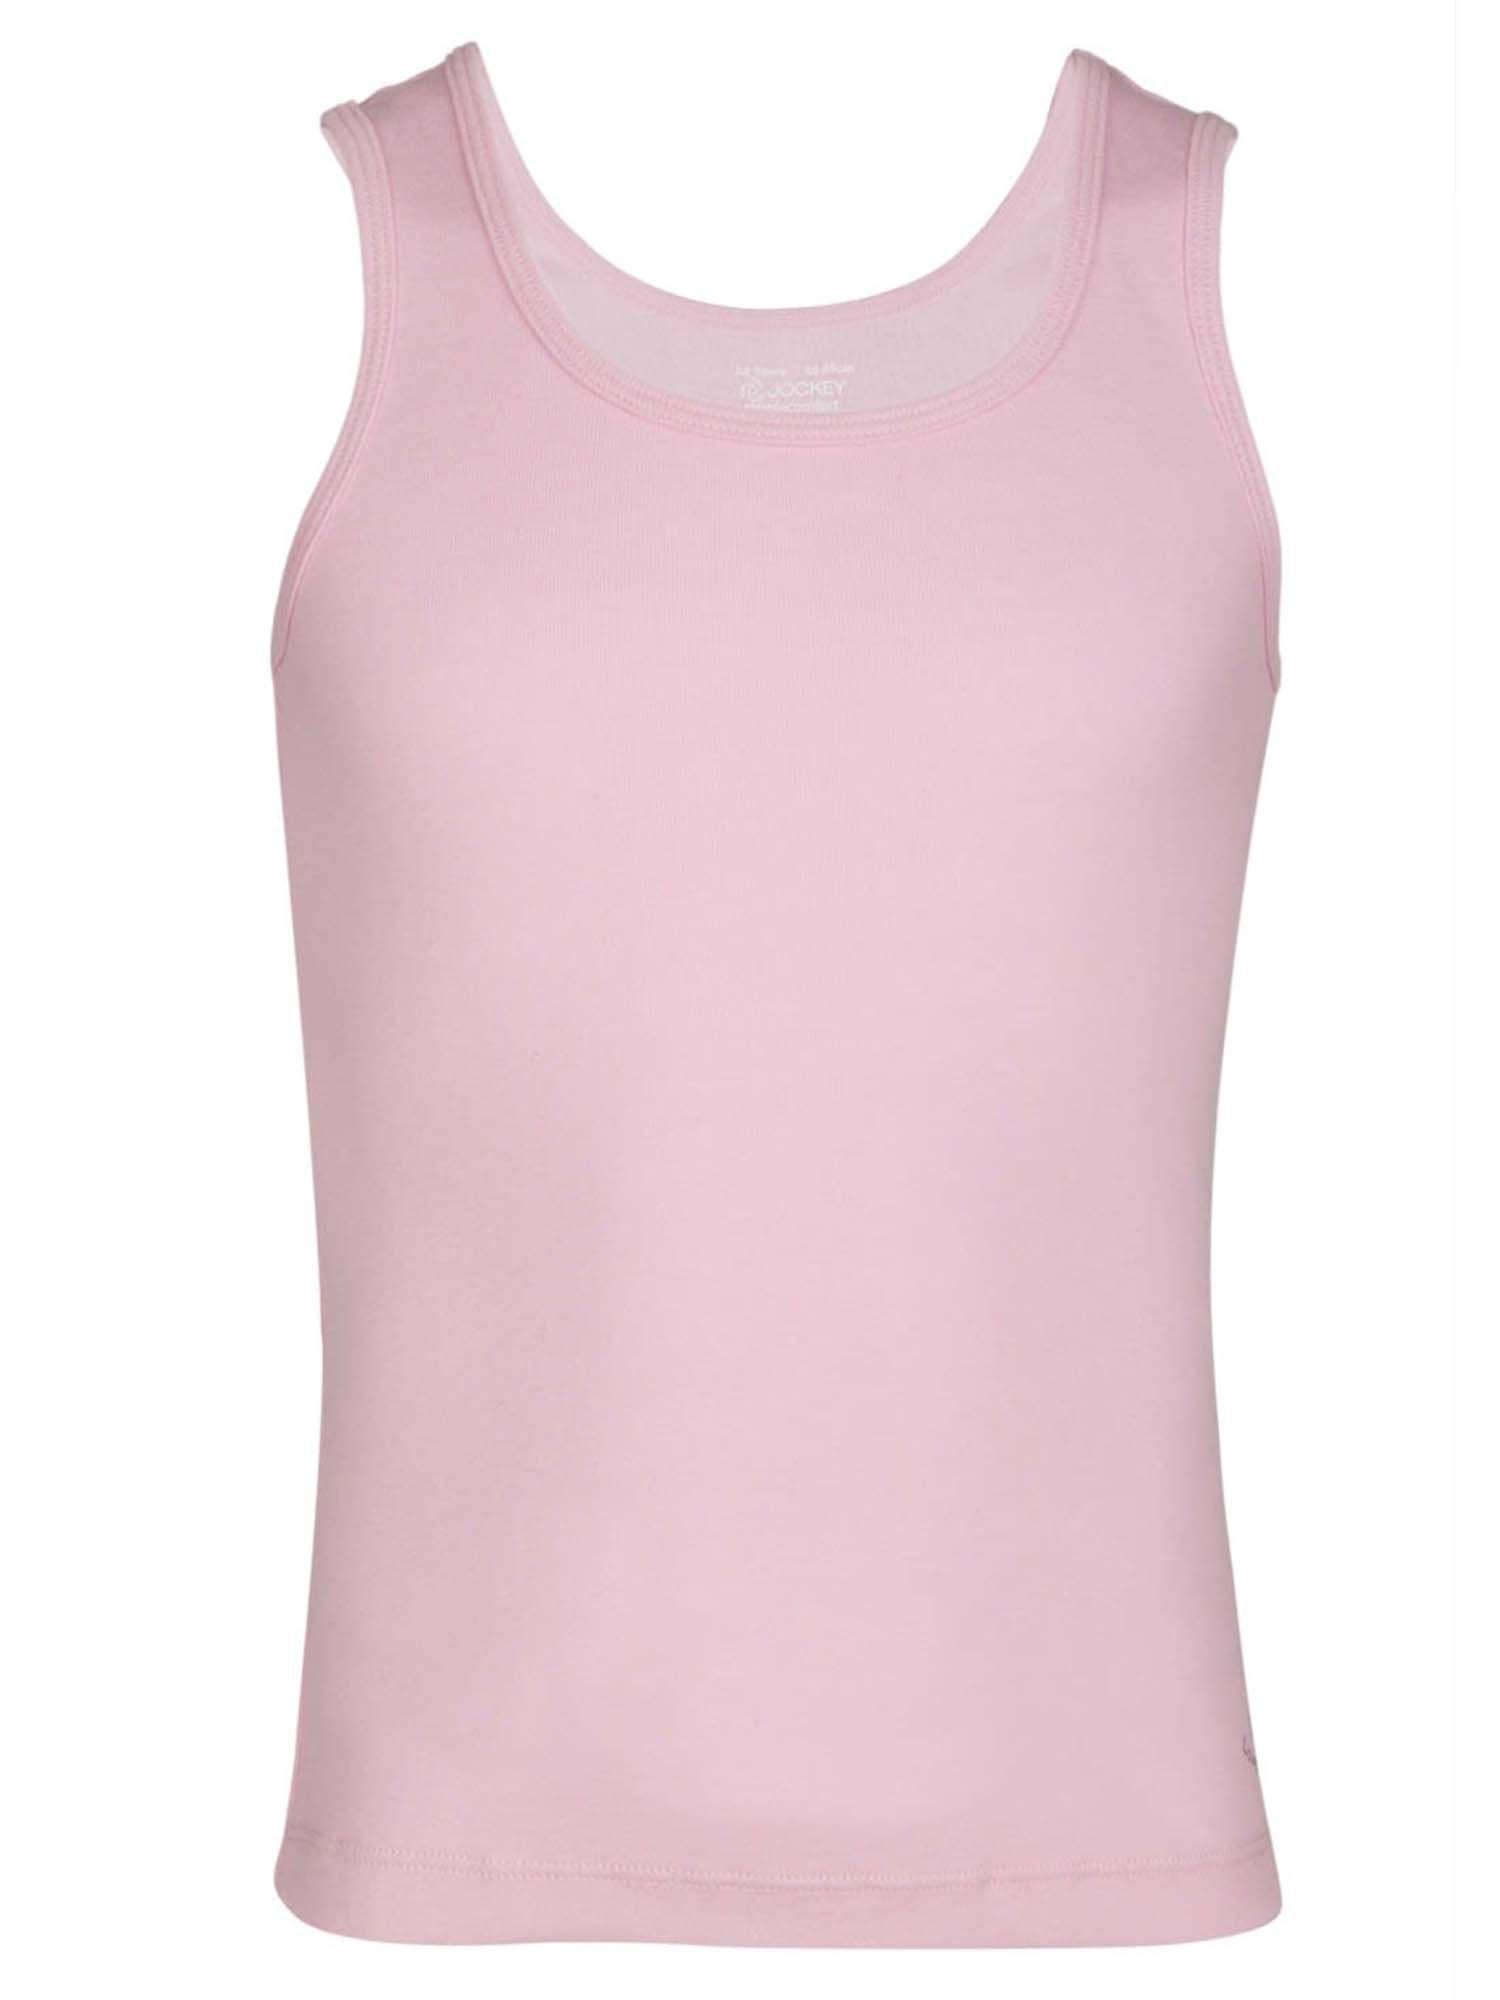 sweet lilac girls tank top - style number - (sg02)